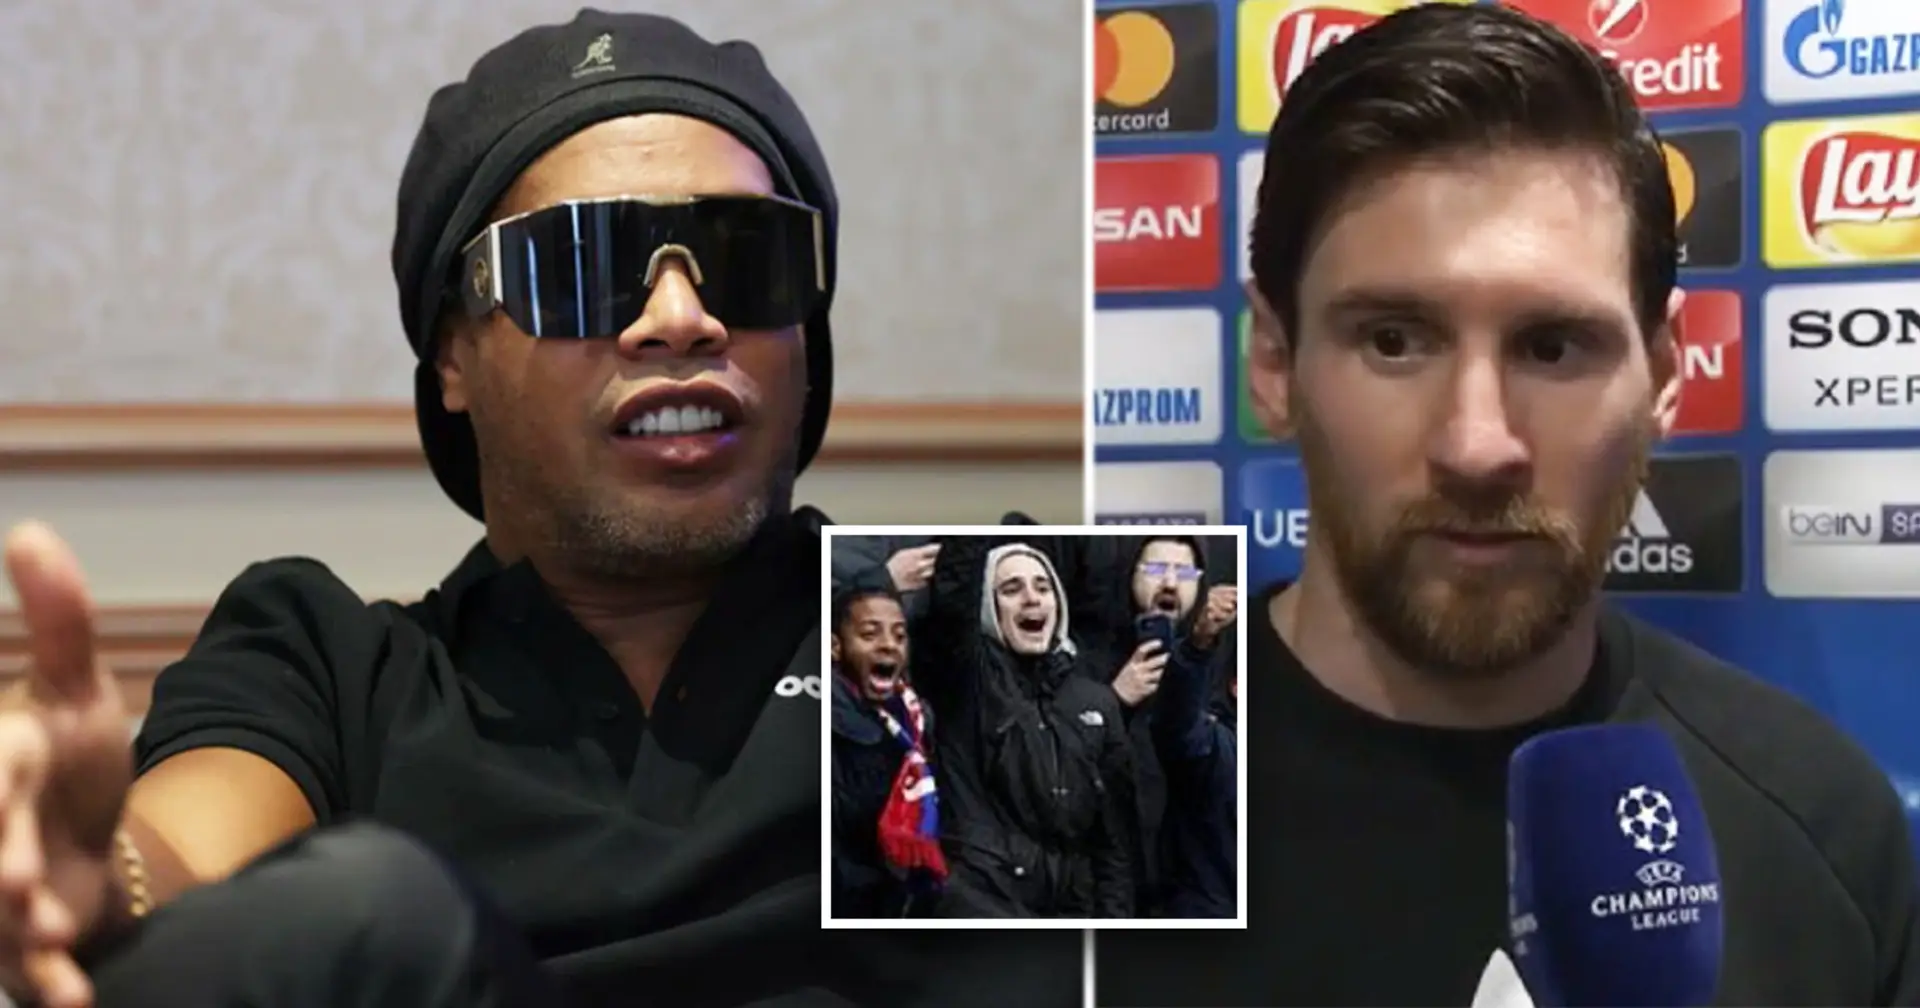 'If you whistle the best player in the world, who do you applaud?': Ronaldinho – to PSG fans